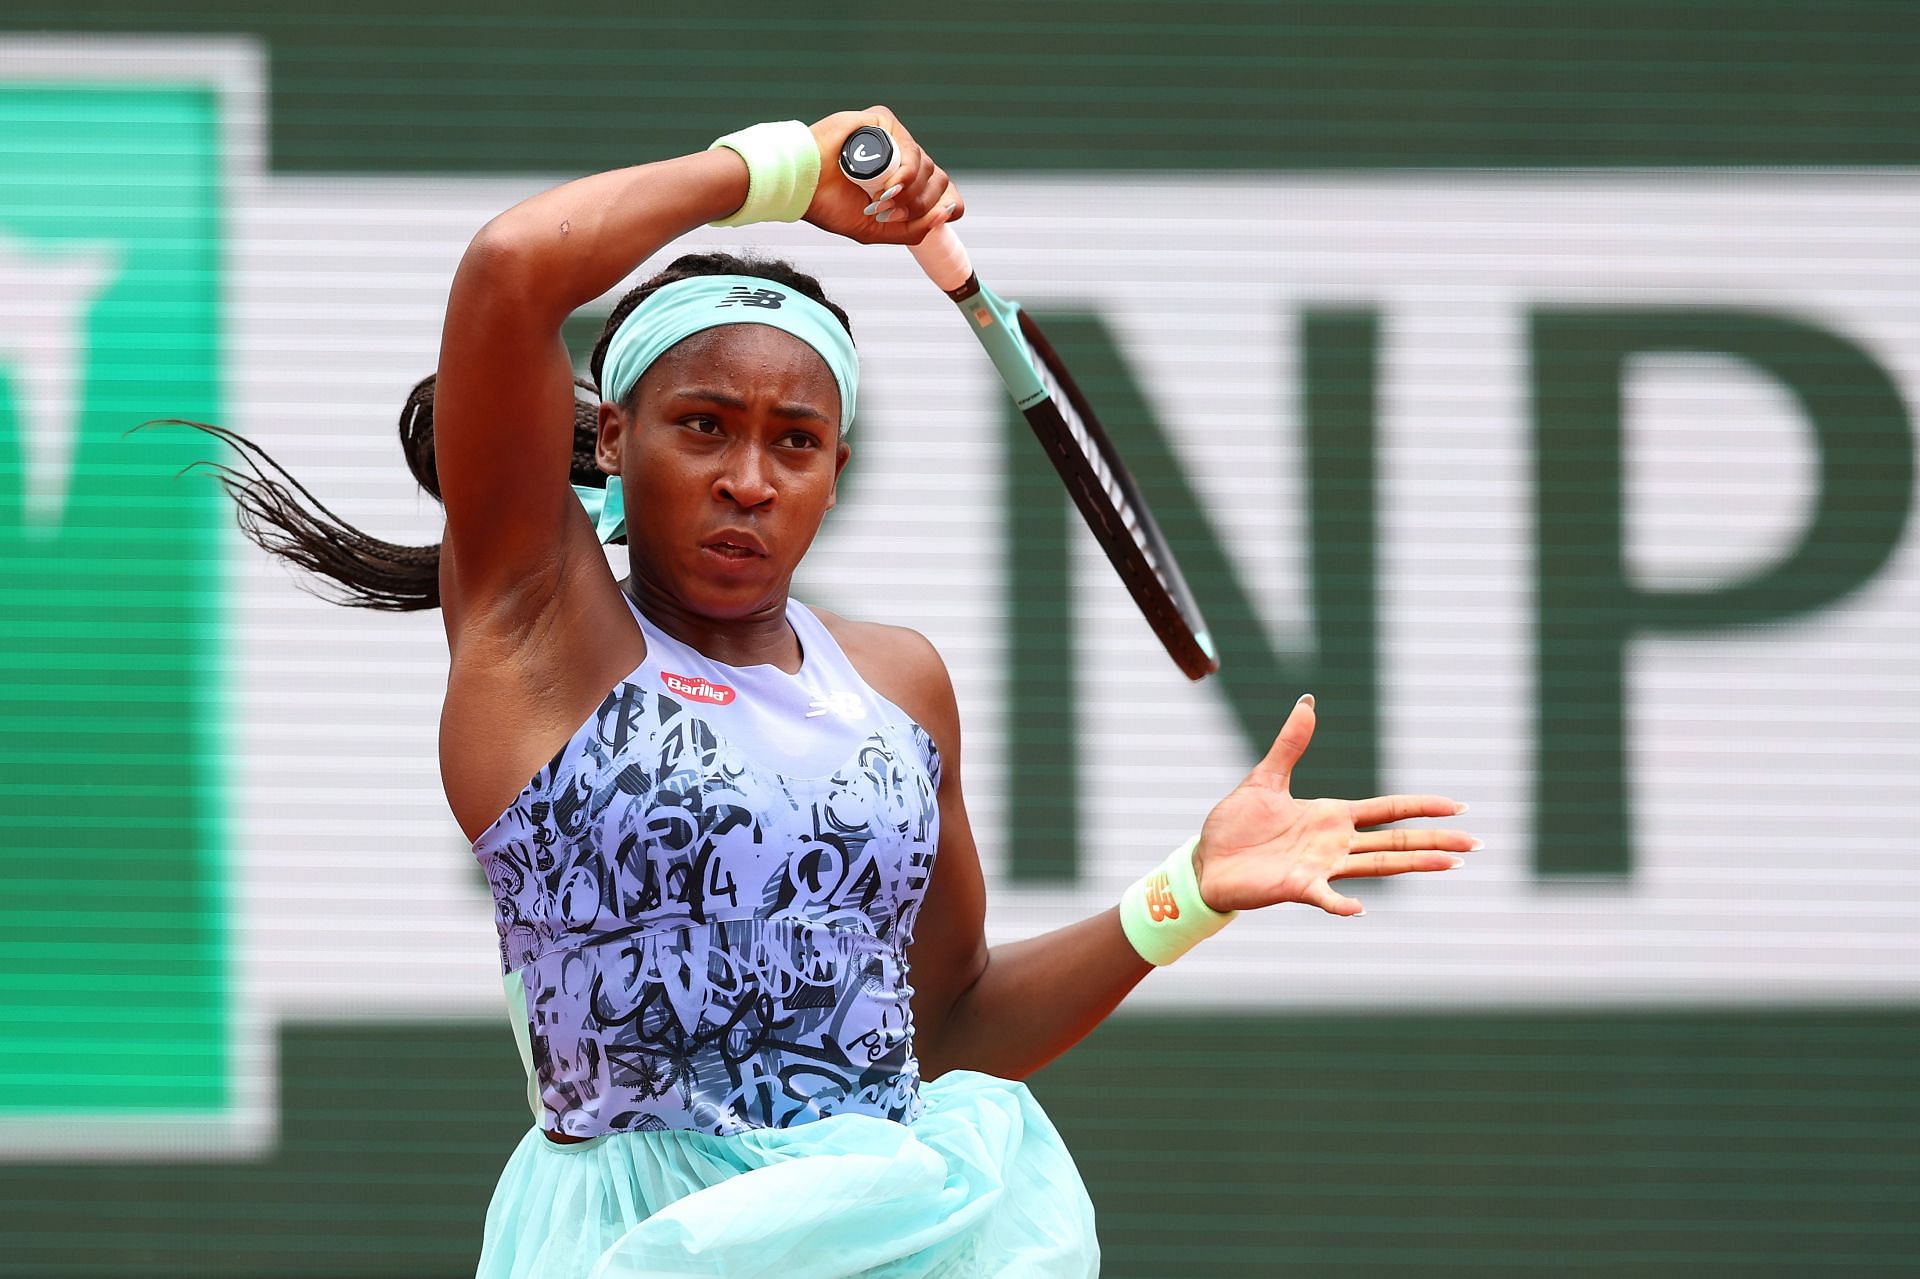 Coco Gauff faces Sloane Stephens in the quarterfinals of the French Open